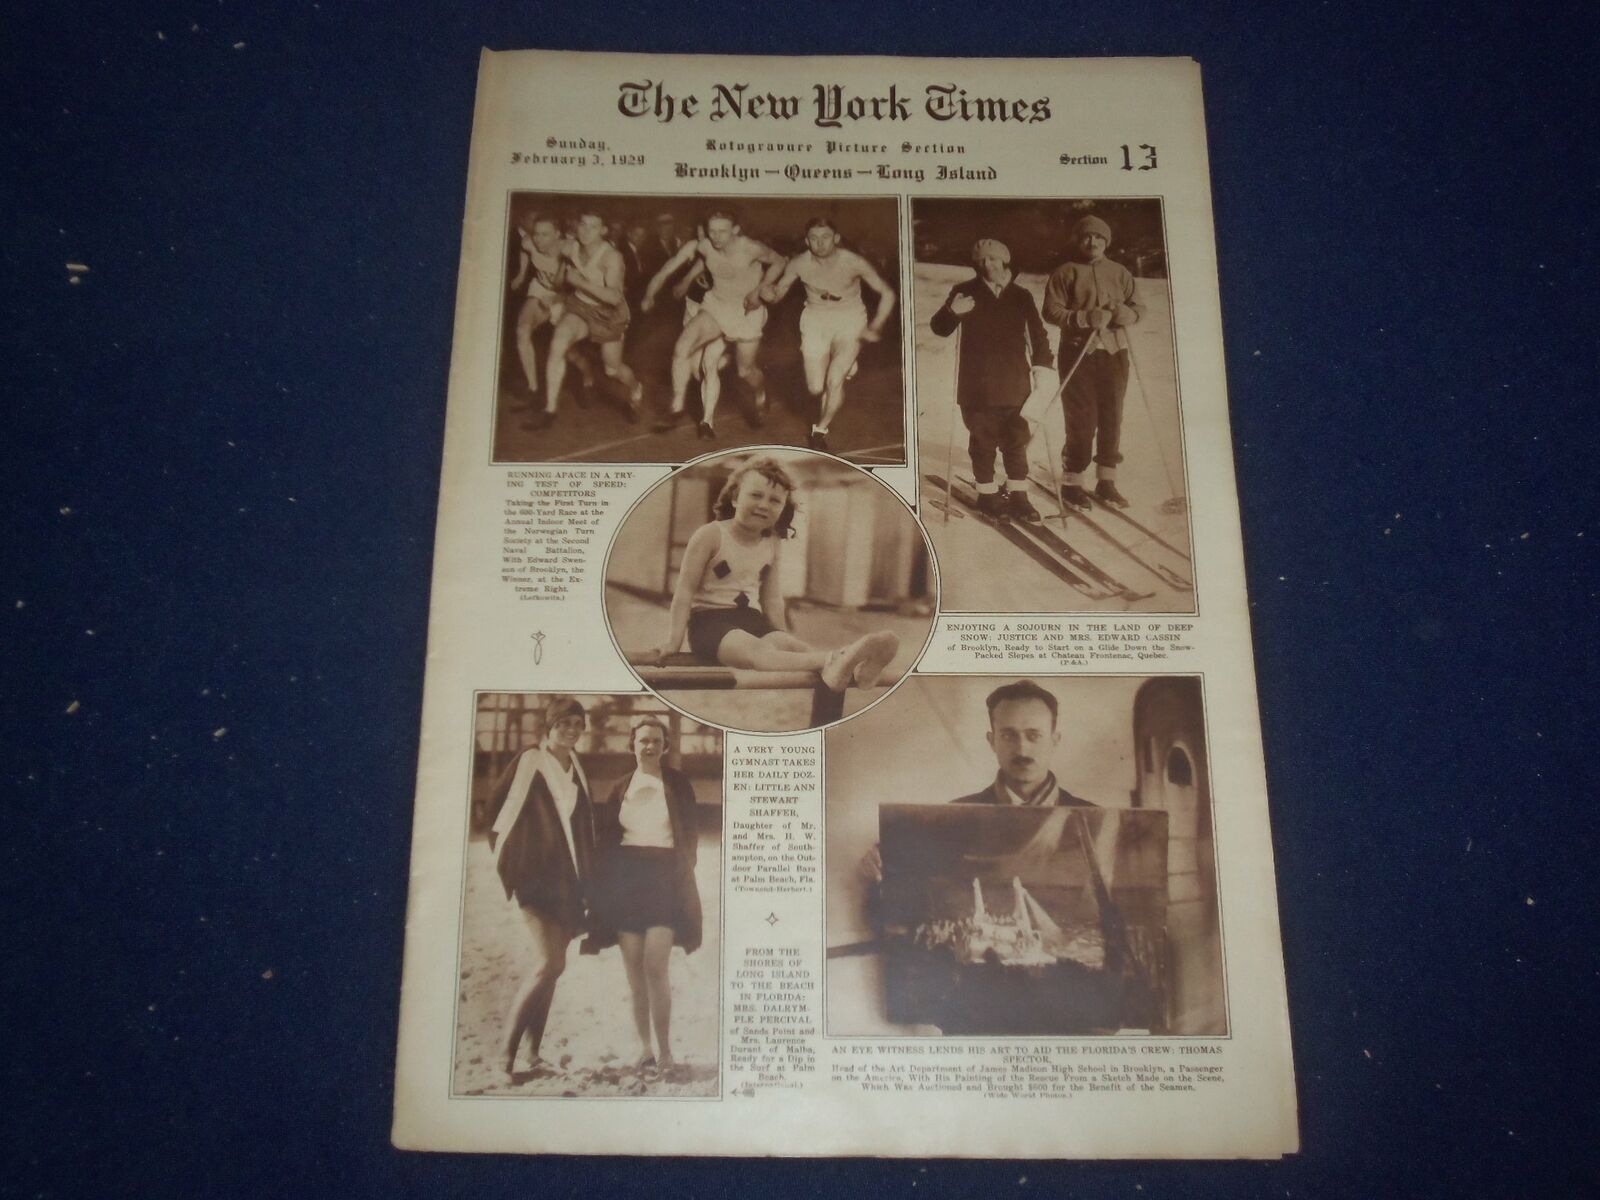 1929 FEBRUARY 3 NEW YORK TIMES BKLYN-QUEENS-LONG ISLAND PICTURE SECTION- NP 5000